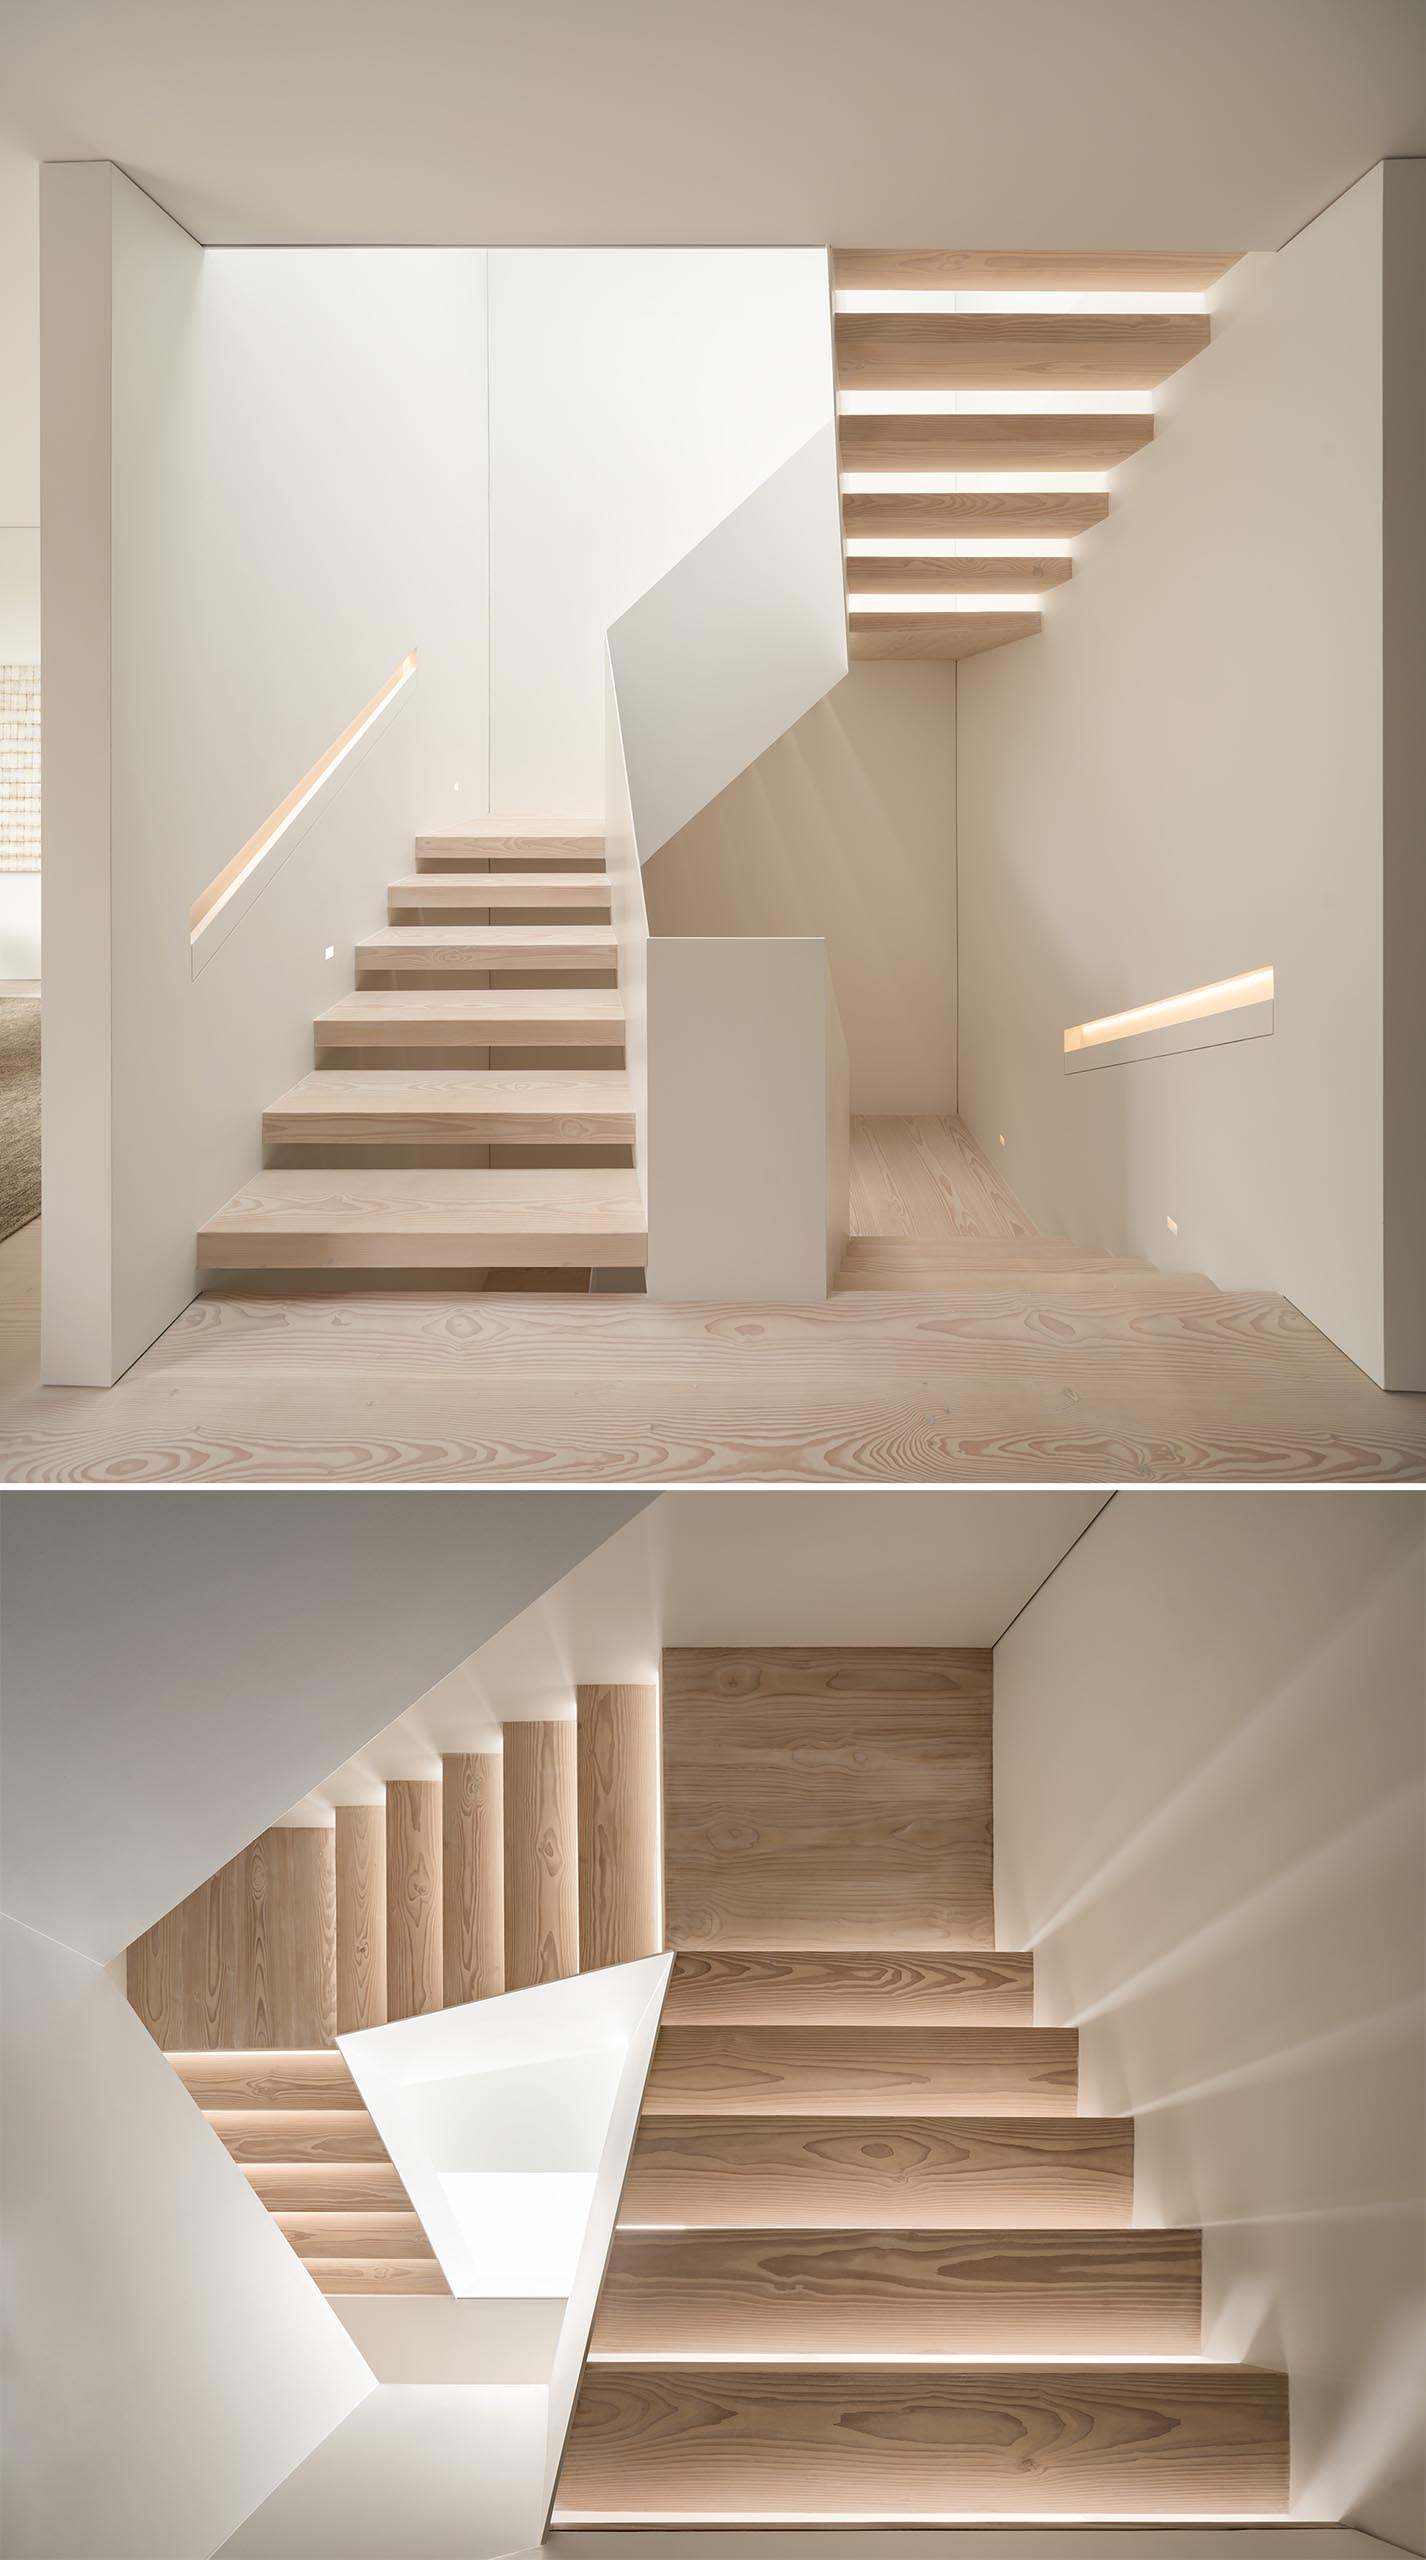 Light wood and white stairs have built-in handrails with hidden lighting.